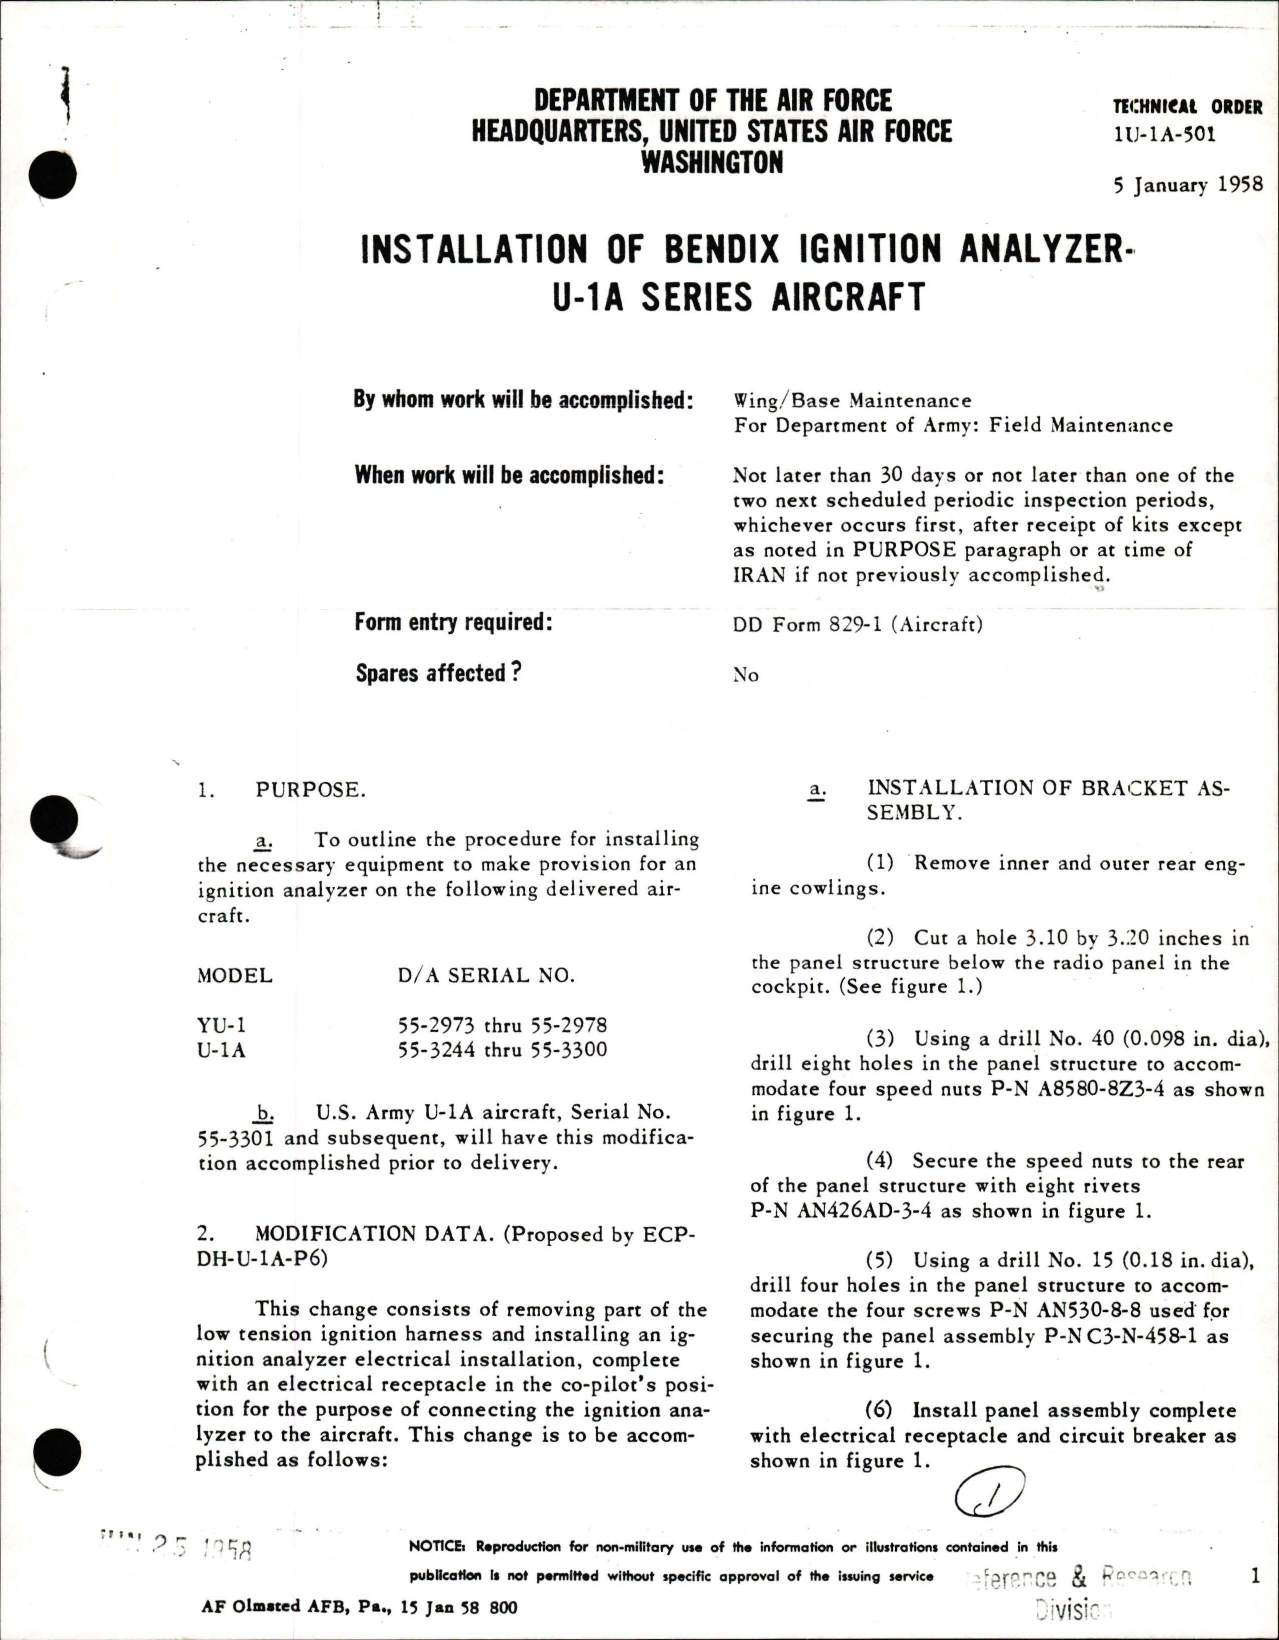 Sample page 1 from AirCorps Library document: Flight Manual for DHC-3 Otter